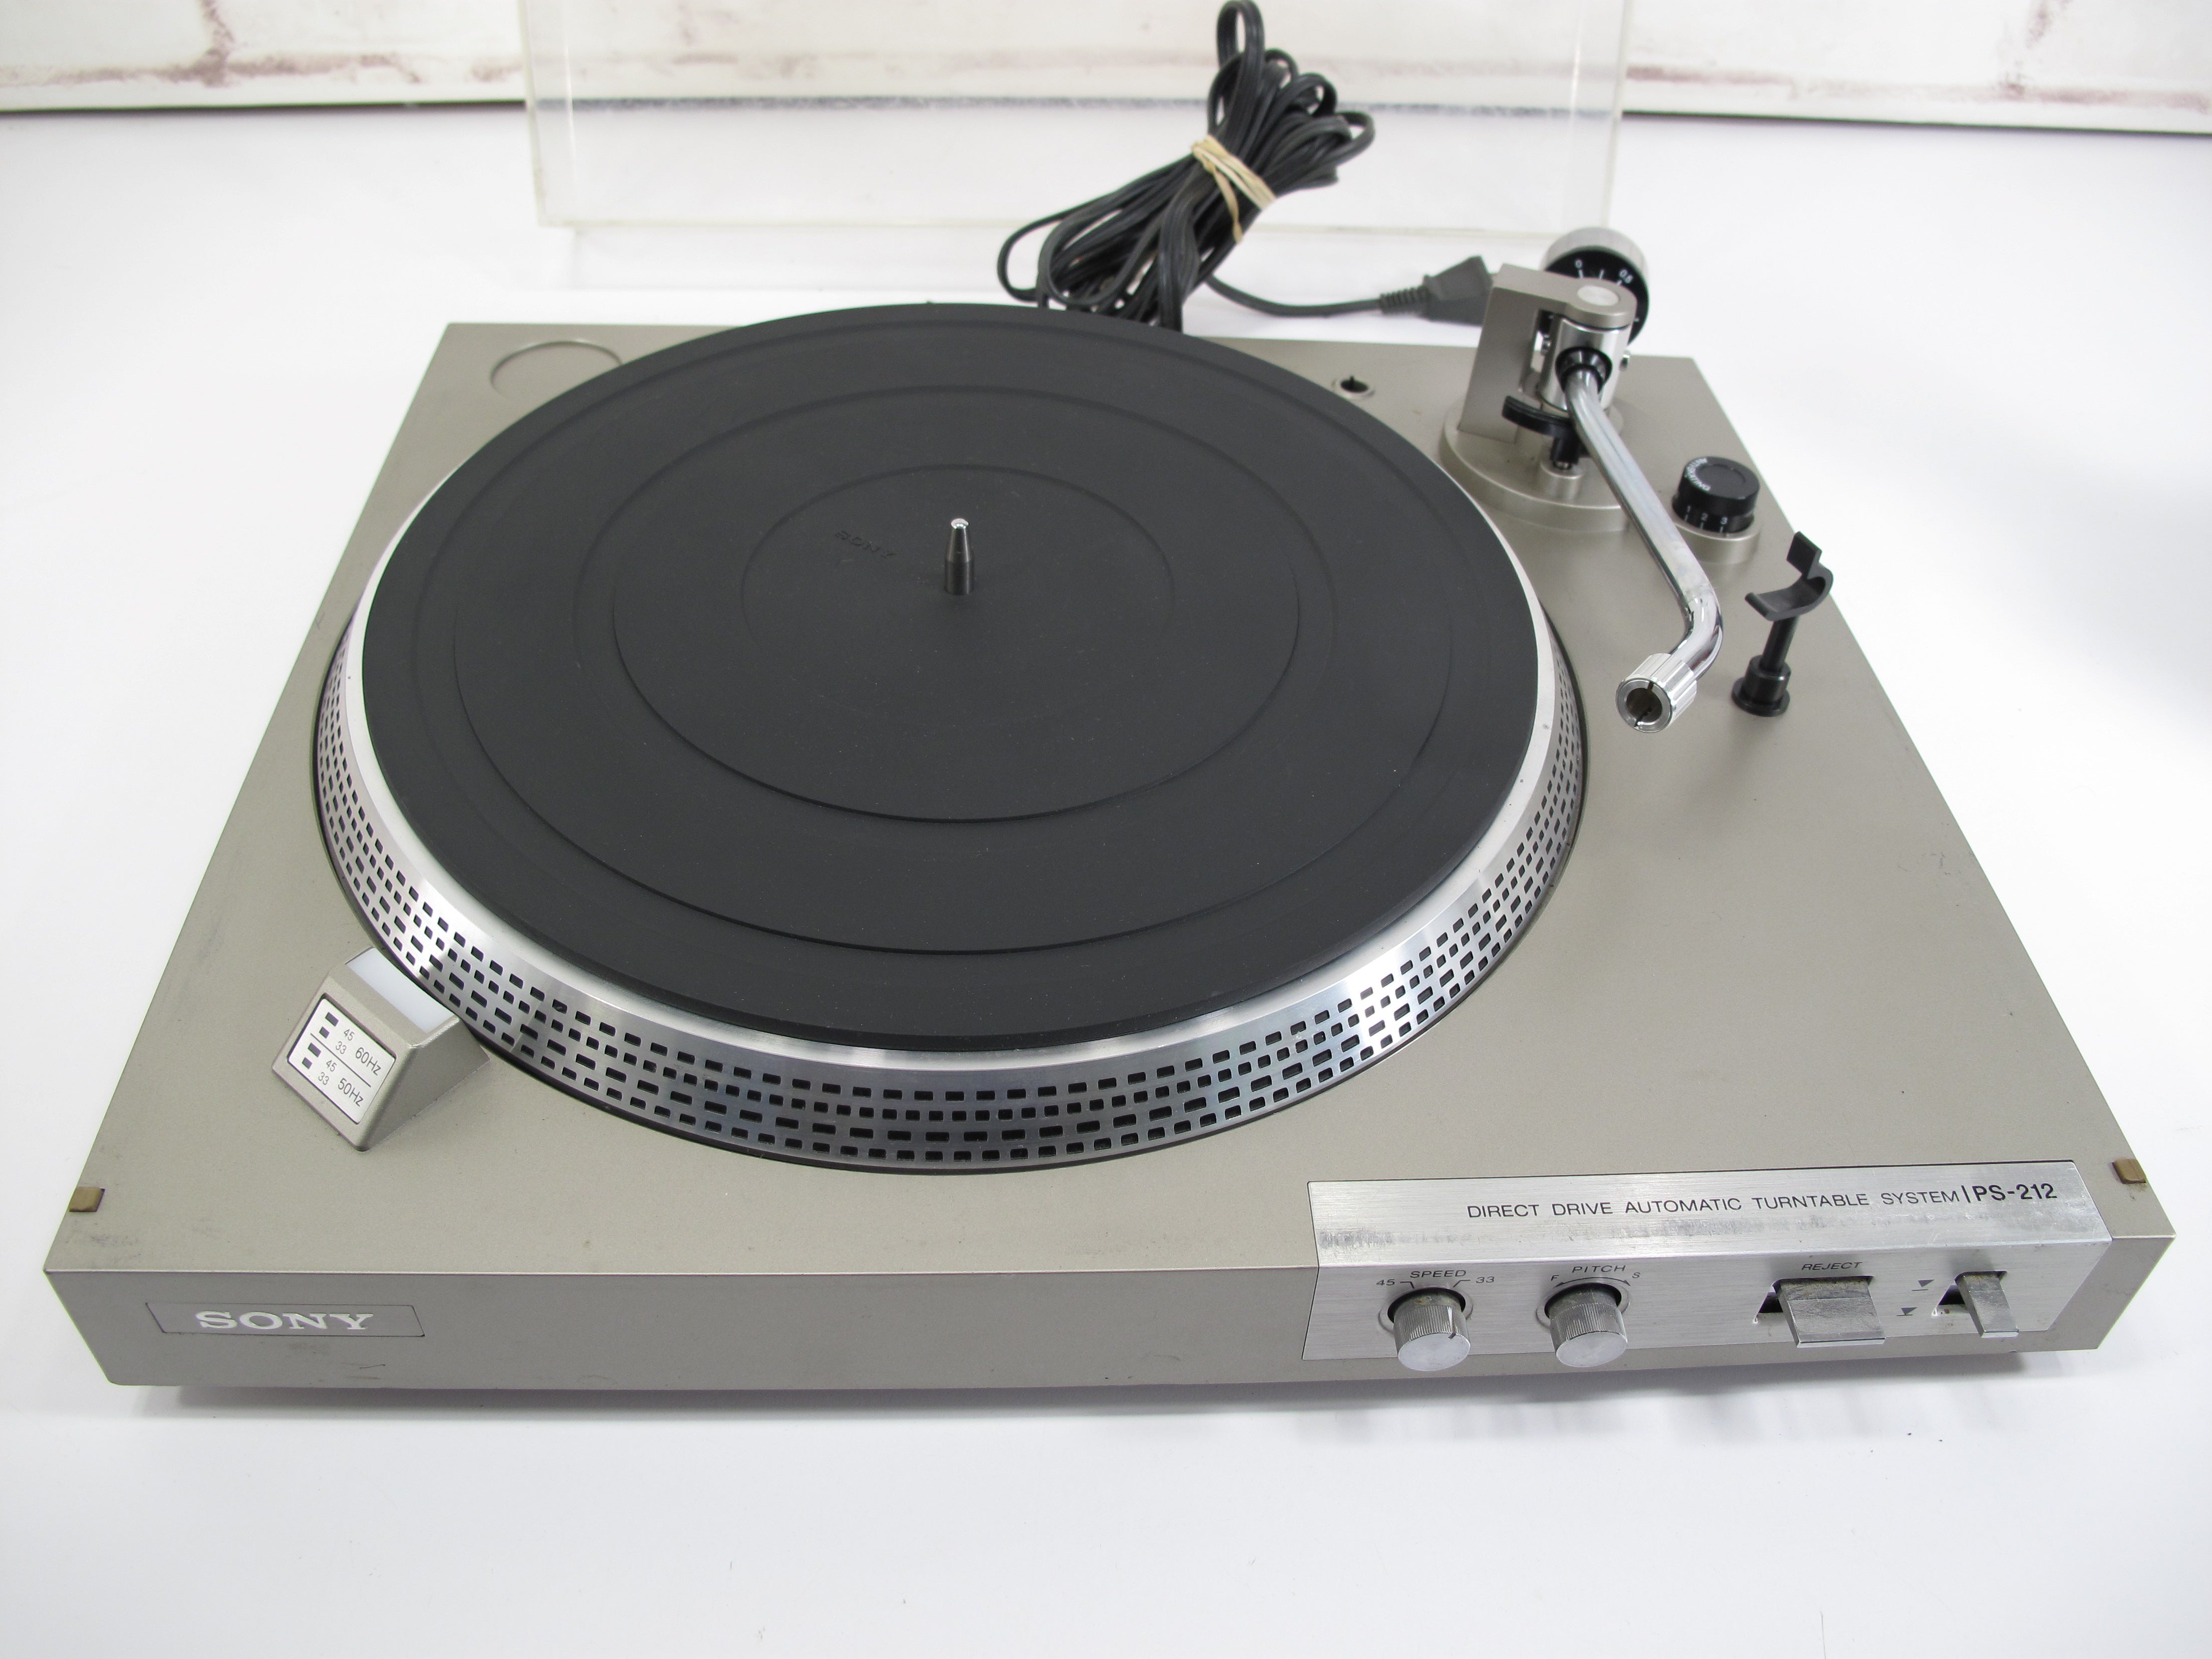 Sony PS-212 Direct Drive Semi Automatic Turntable Record Player